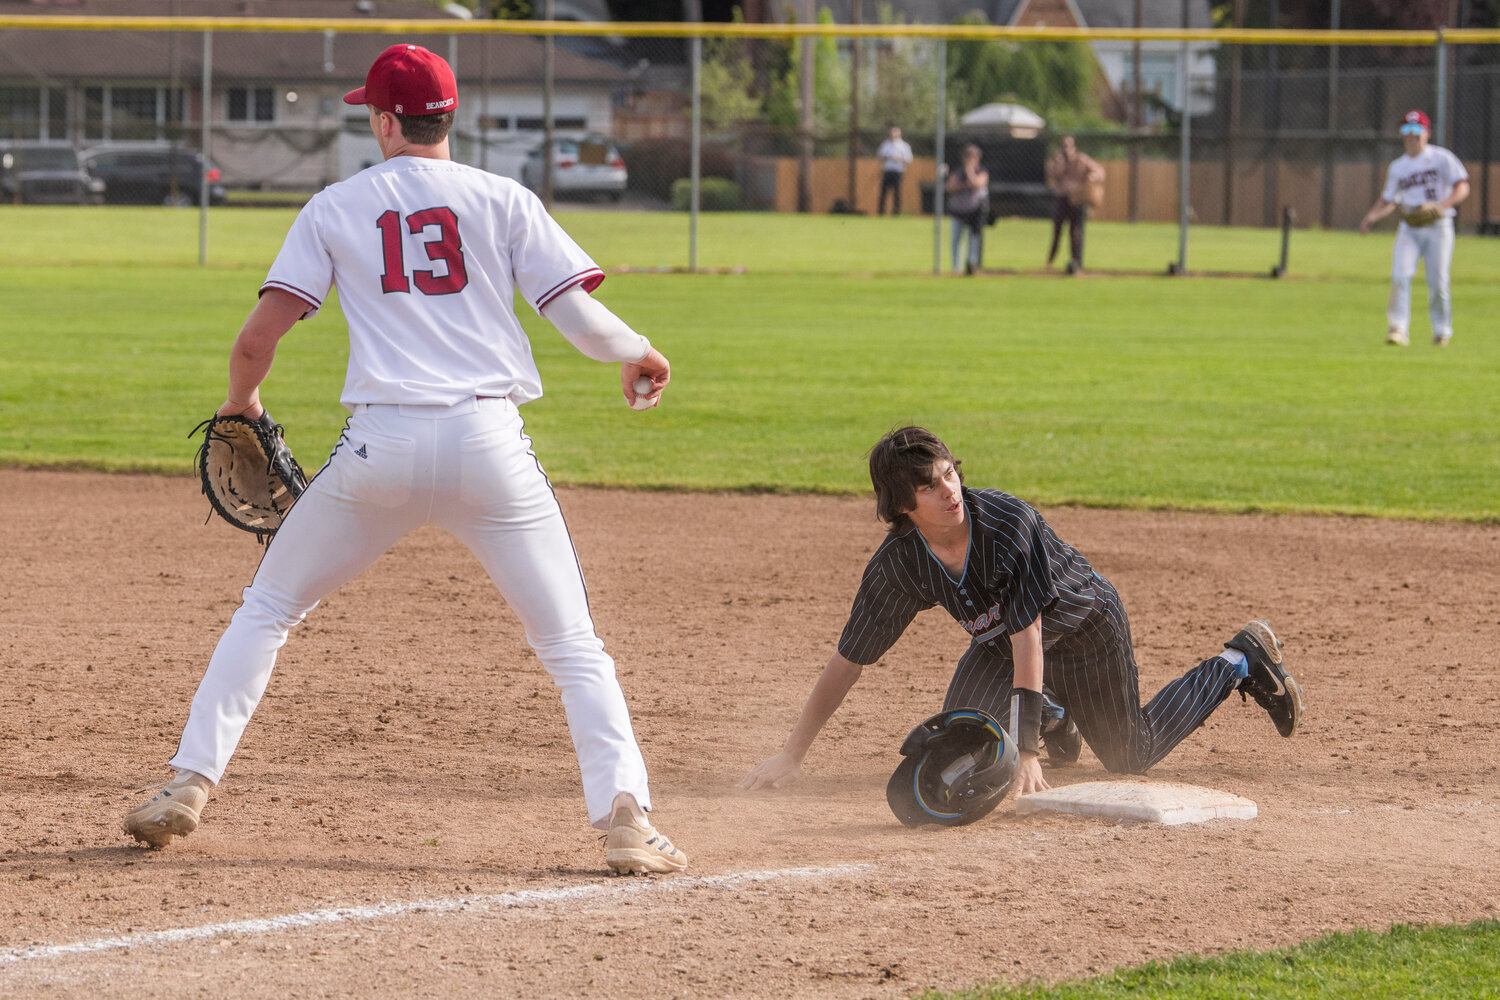 W.F. West’s Gavin Fugate (13) makes an out on a throw down to first base during a game against Mark Morris at Bearcat Stadium in Chehalis on Tuesday, May 9.